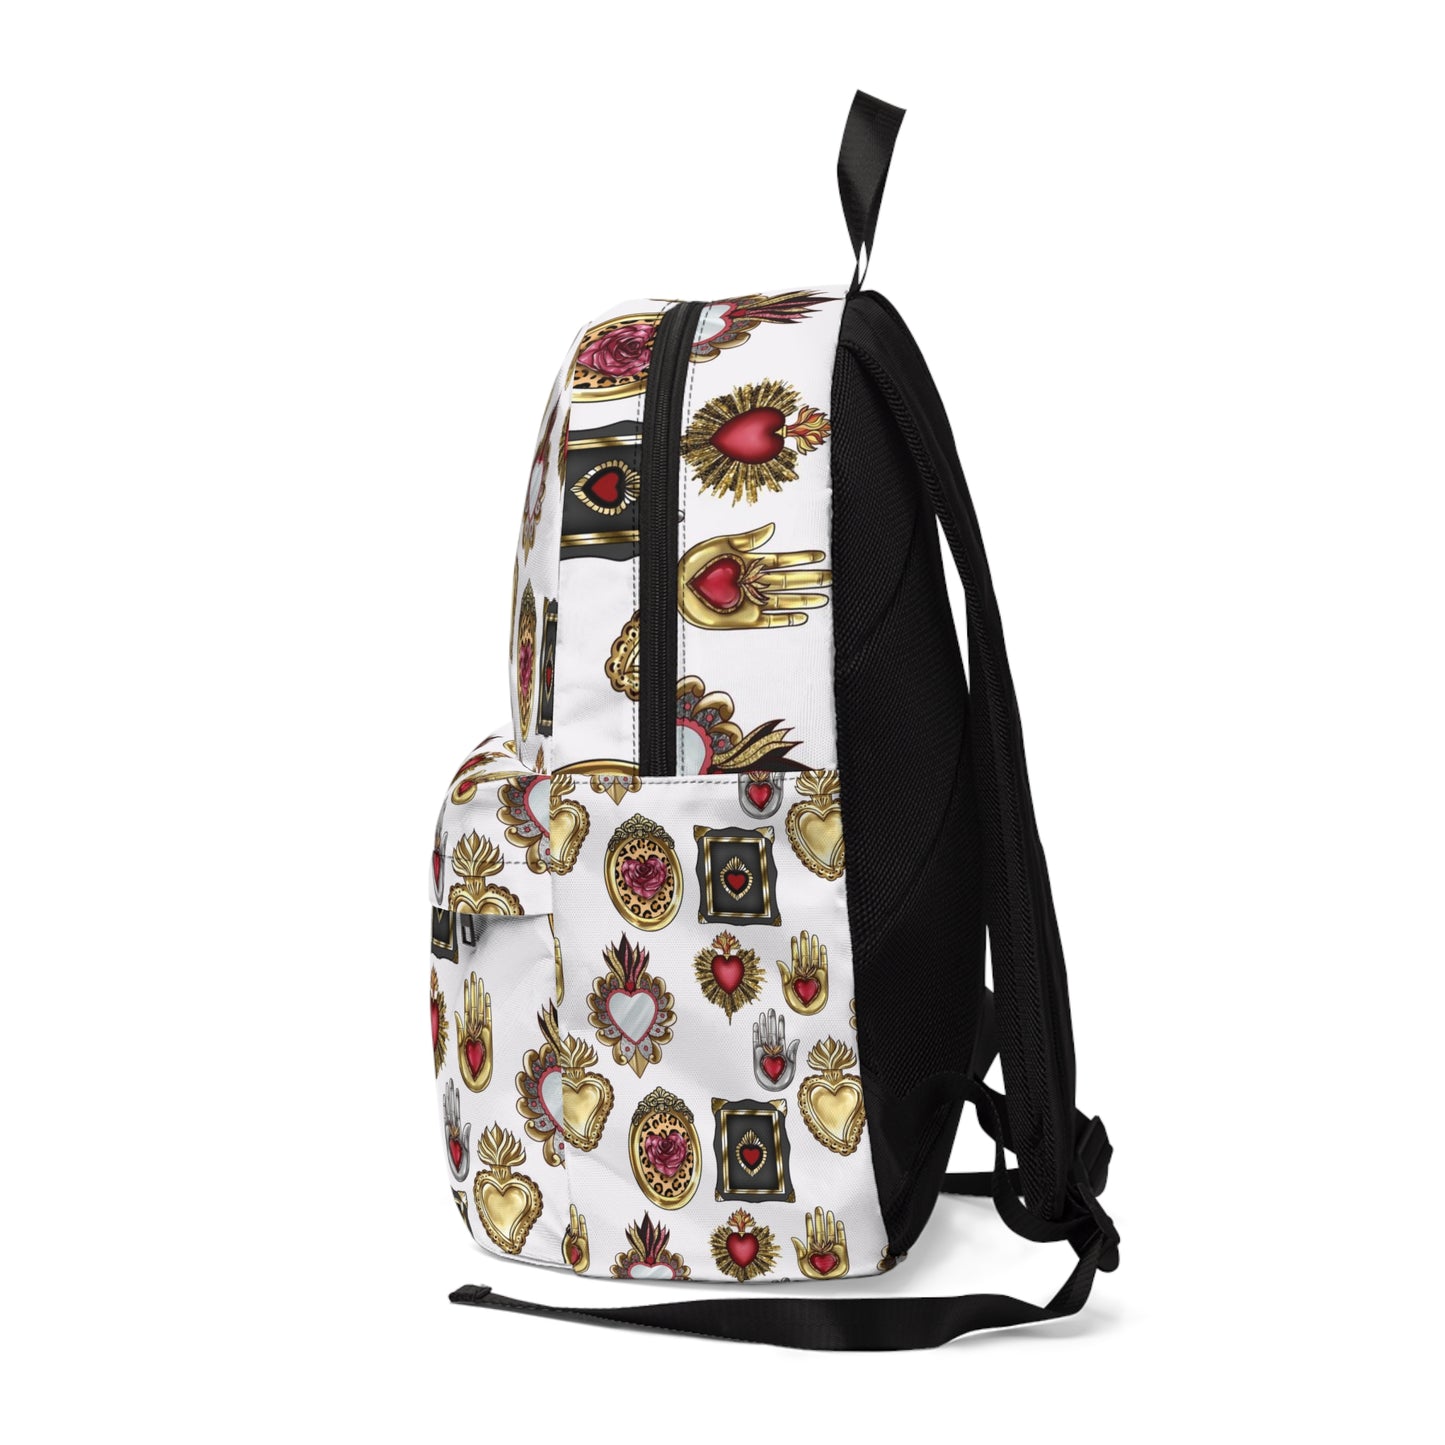 Sacred hearts Backpack for her. Back to school 2023 with this Mexican book bag. Golden, white, black and red backpack with holy hearts.